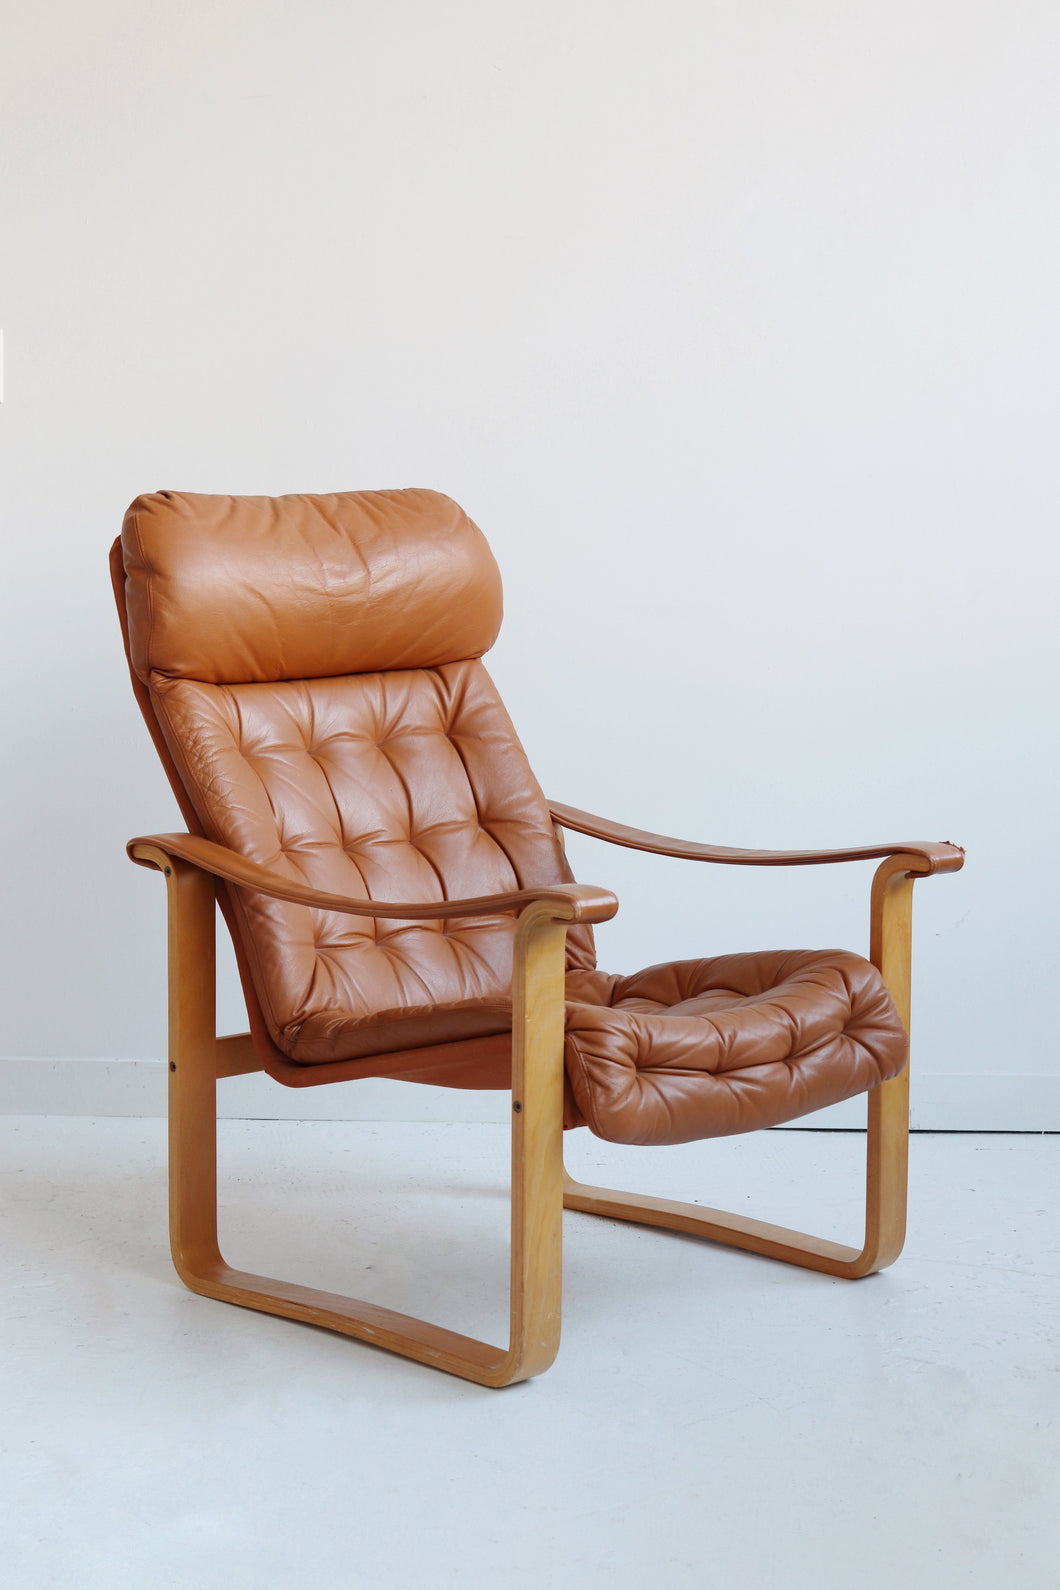 70's Finnish Leather Bentwood Lounge Chair